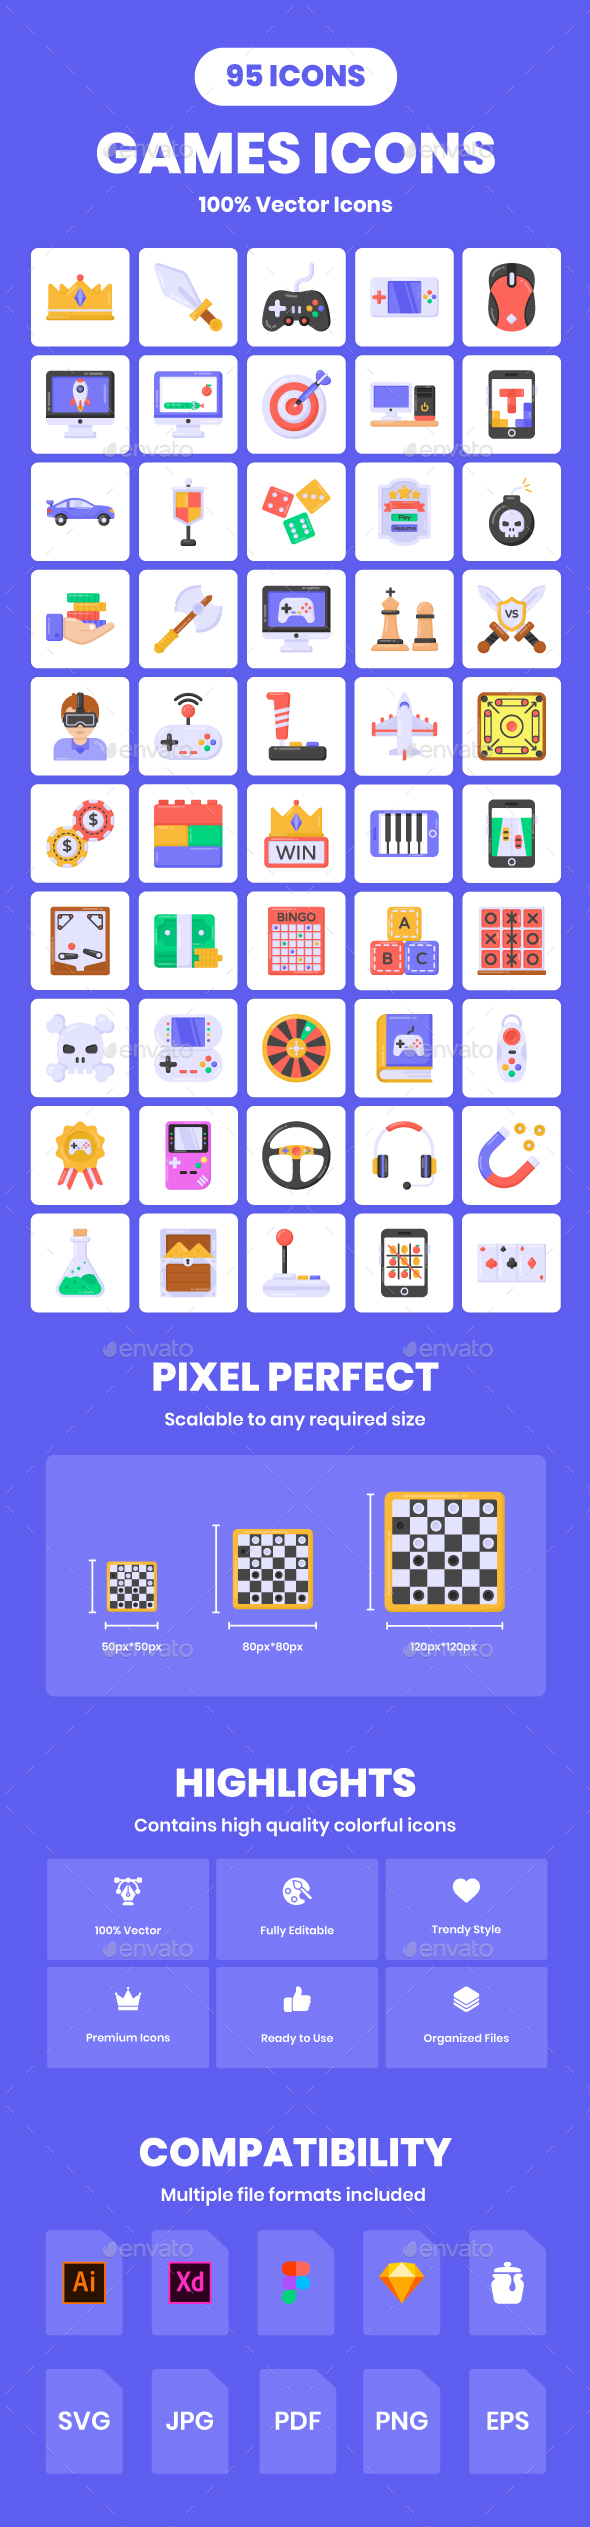 [DOWNLOAD]Flat Detailed Games Icons